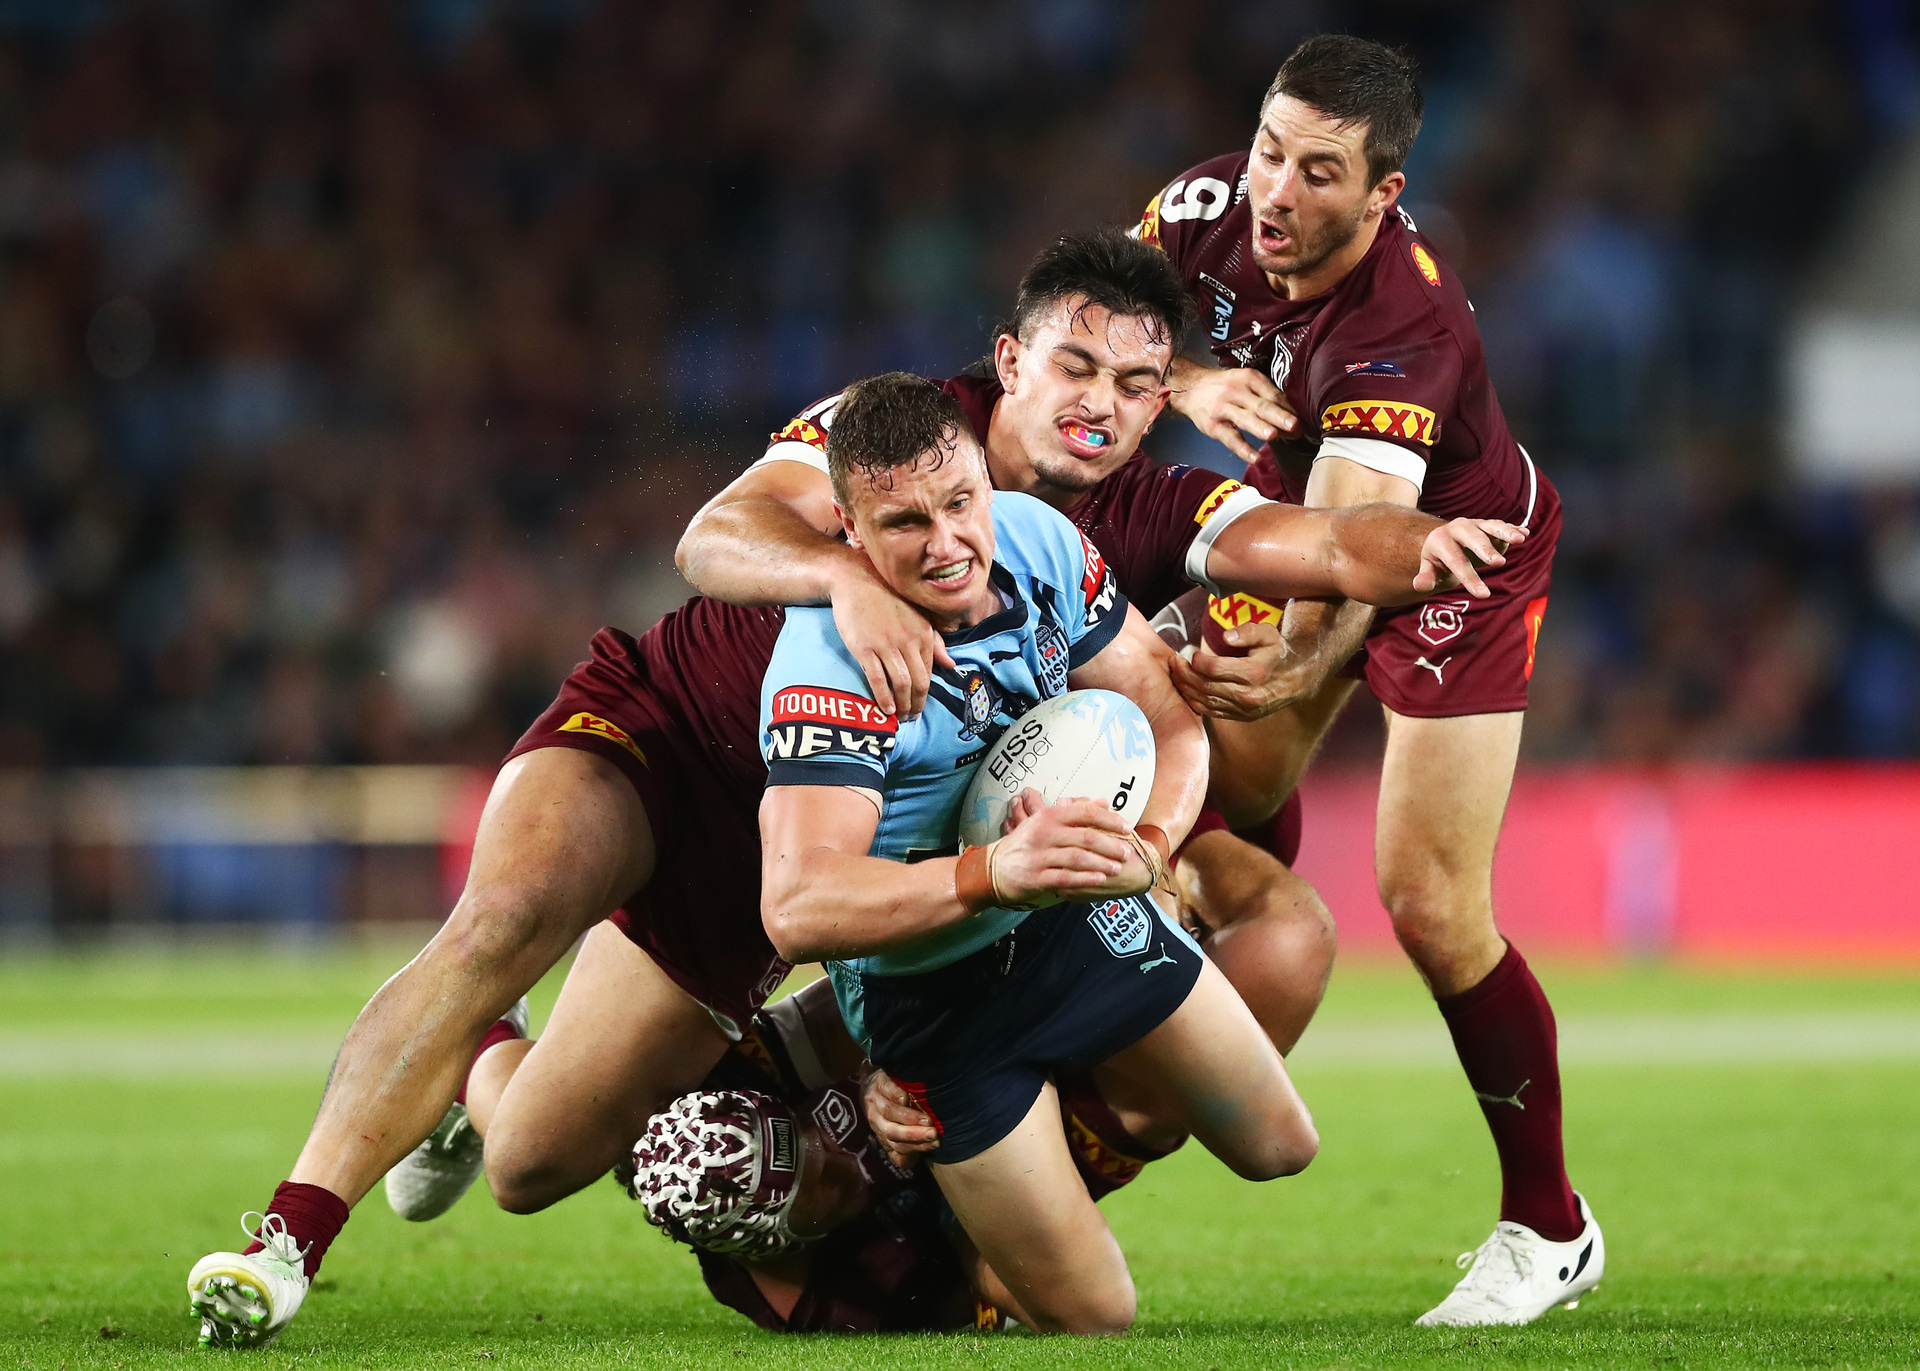 State of Origin What Kiwis need to know about New South Wales v Queensland - Kickoff time, squads, live streaming and how to watch